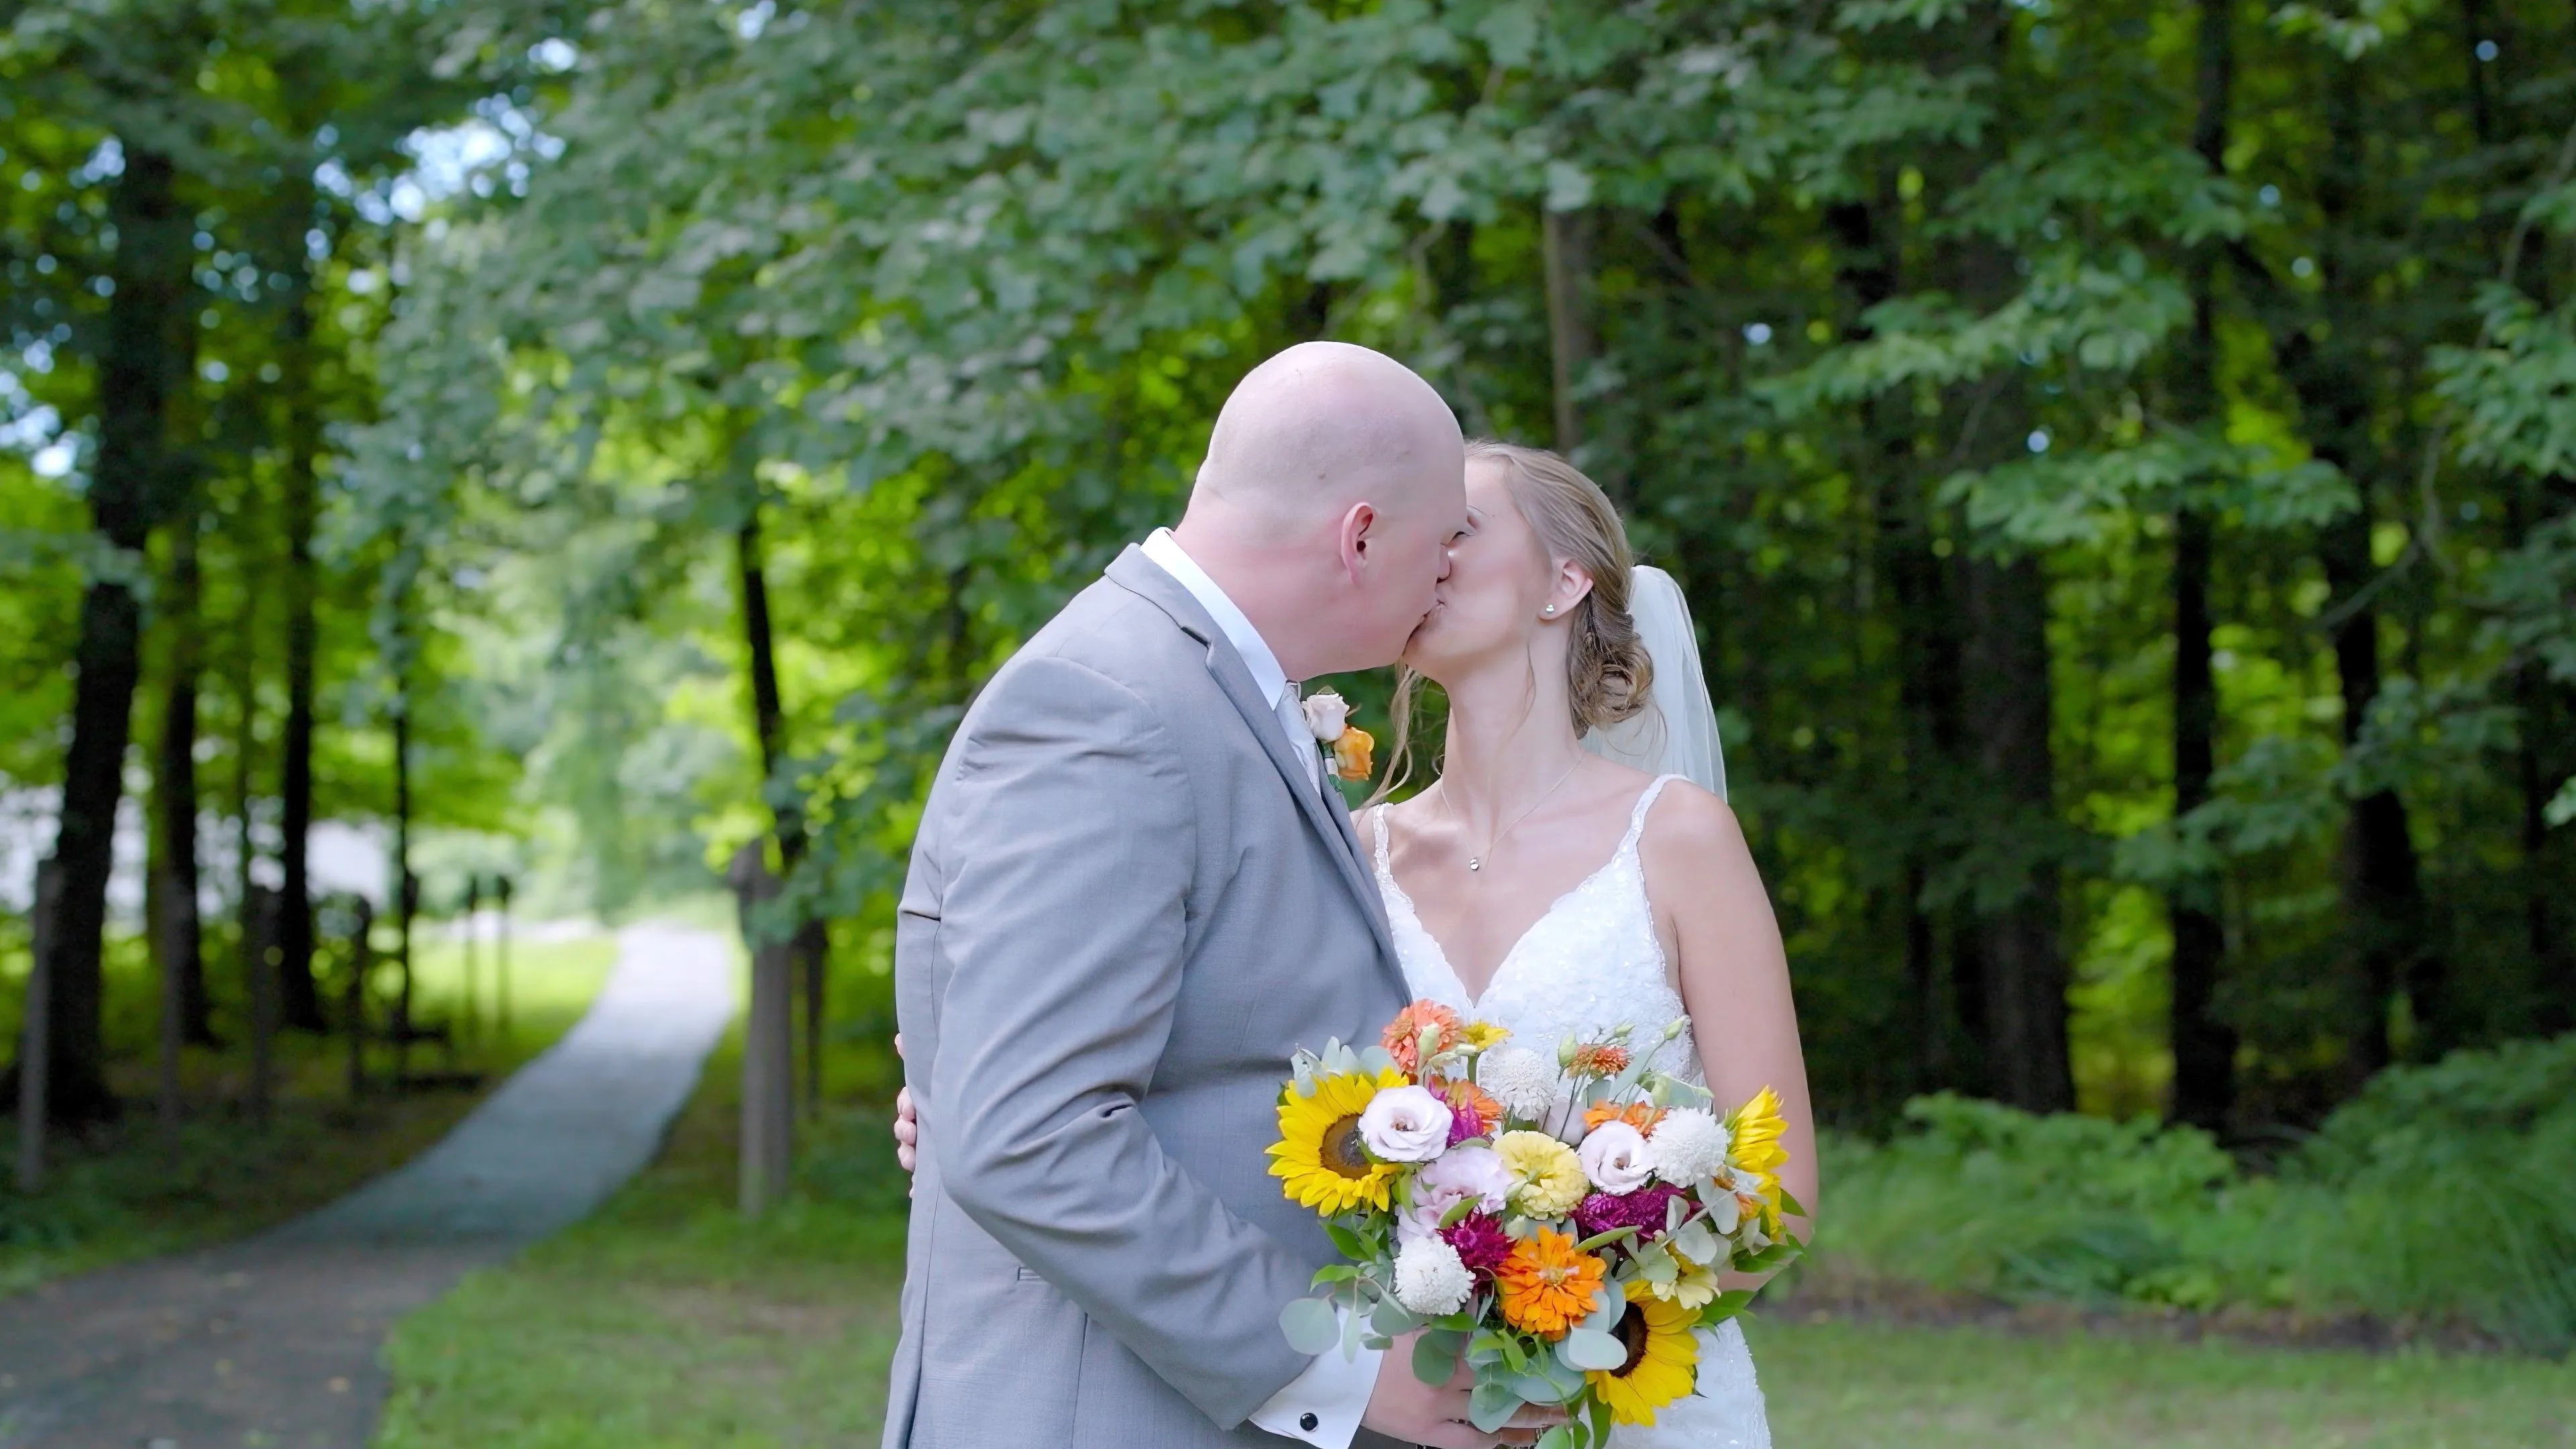 A bride and groom sharing a kiss outdoors, surrounded by greenery, with the bride holding a bouquet of flowers.